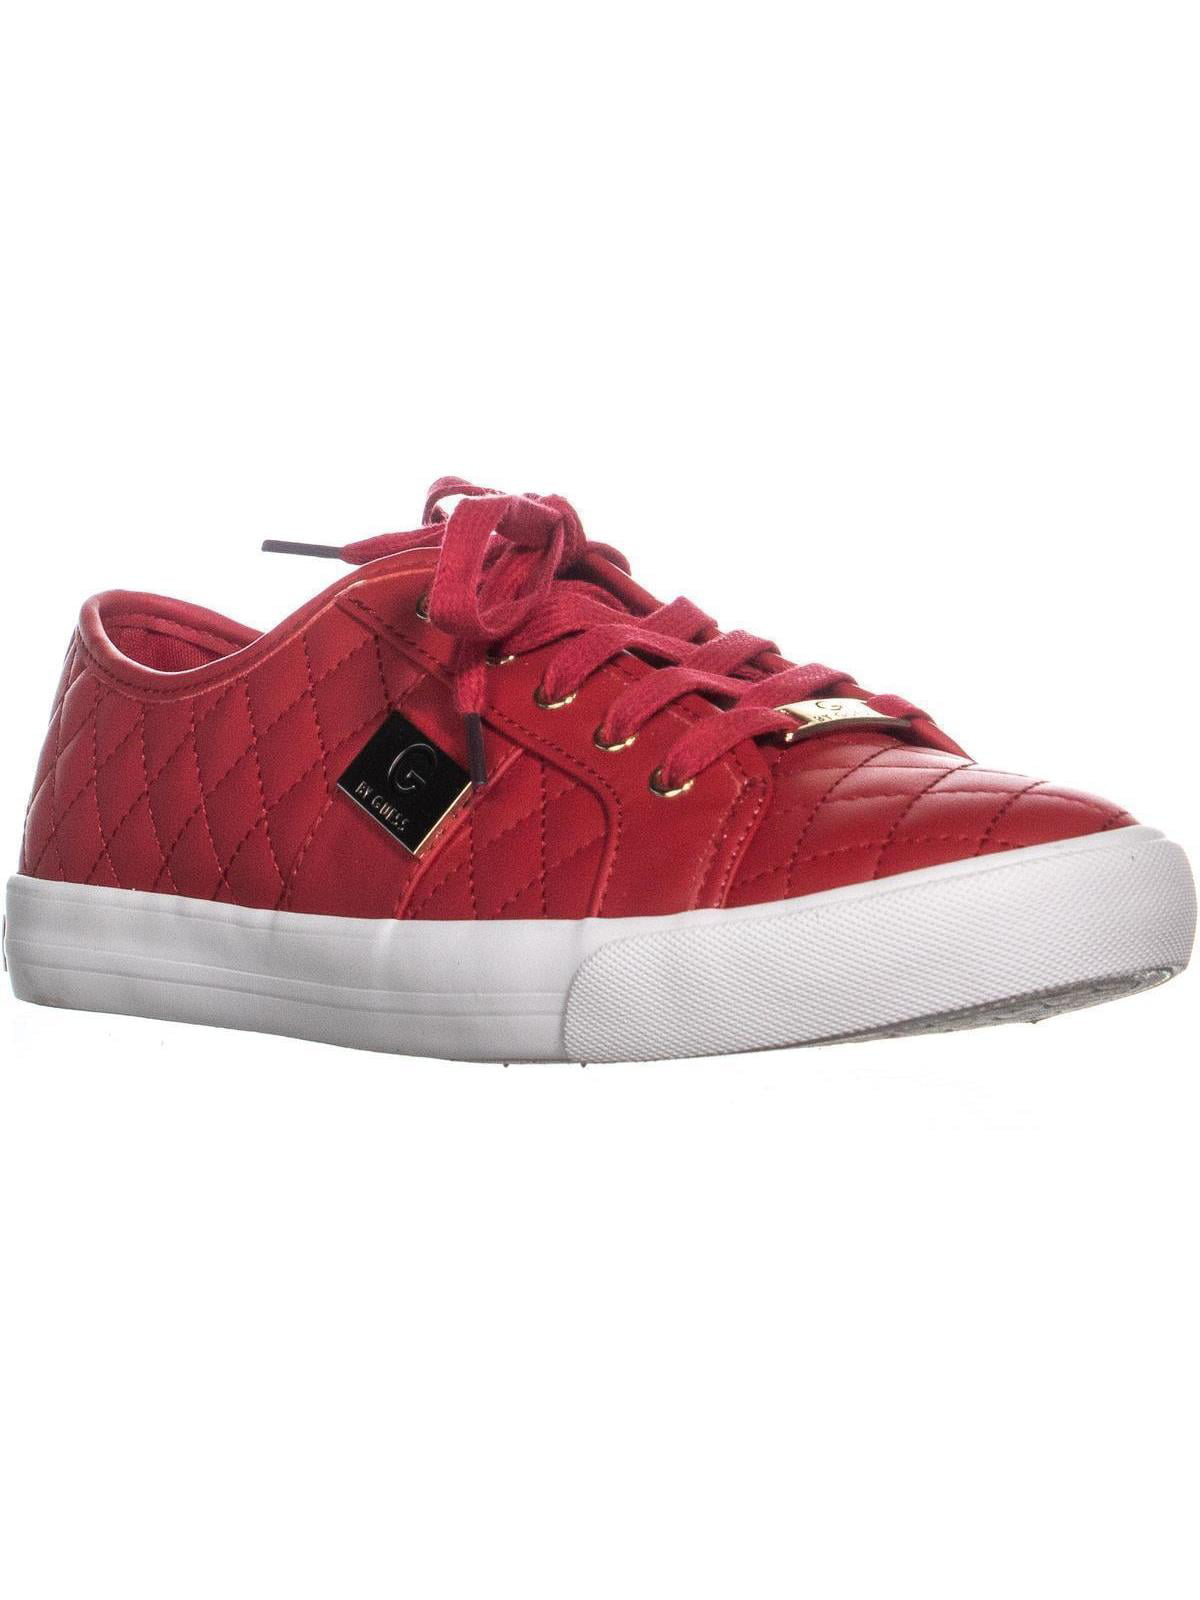 guess red shoes sneakers